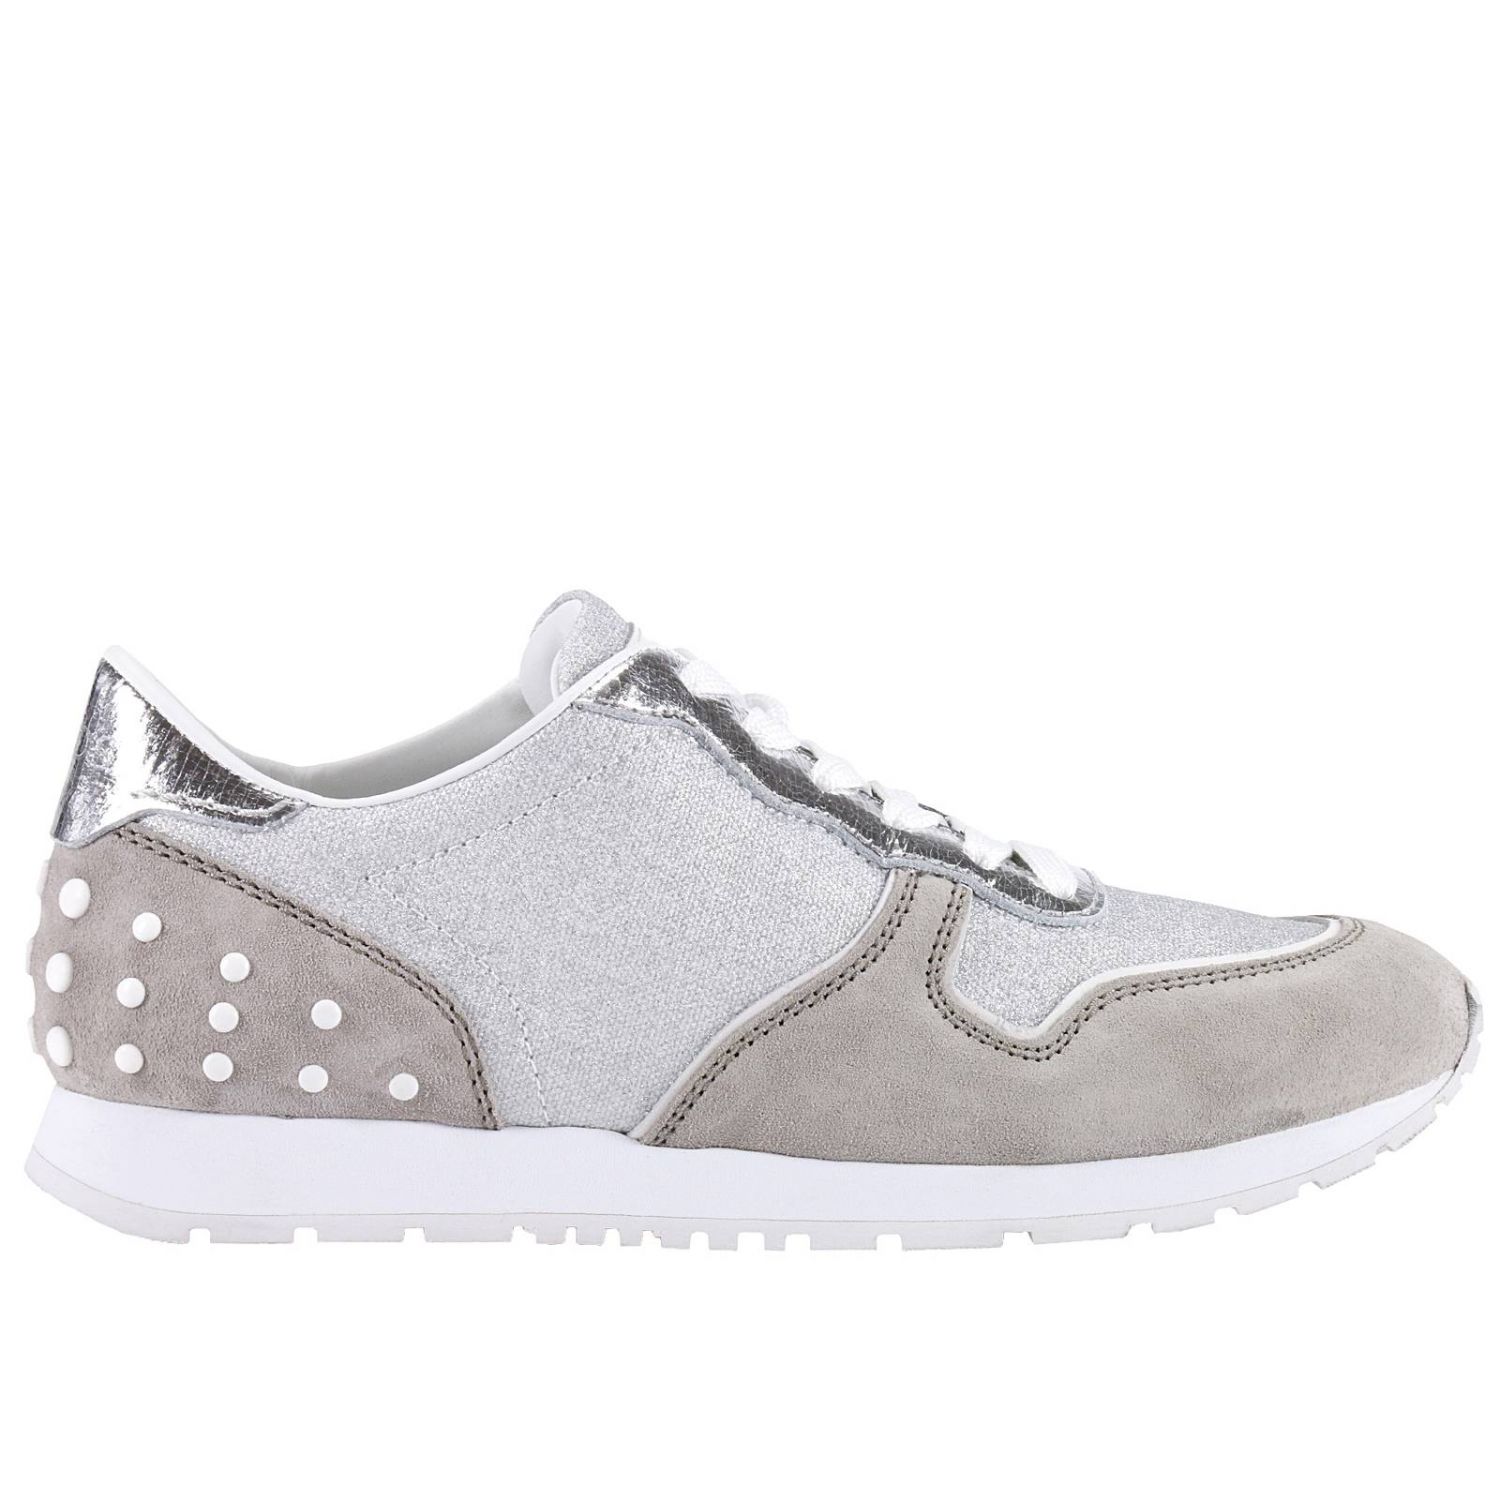 Shoes women Tod's | Sneakers Tods Women Silver | Sneakers Tods ...